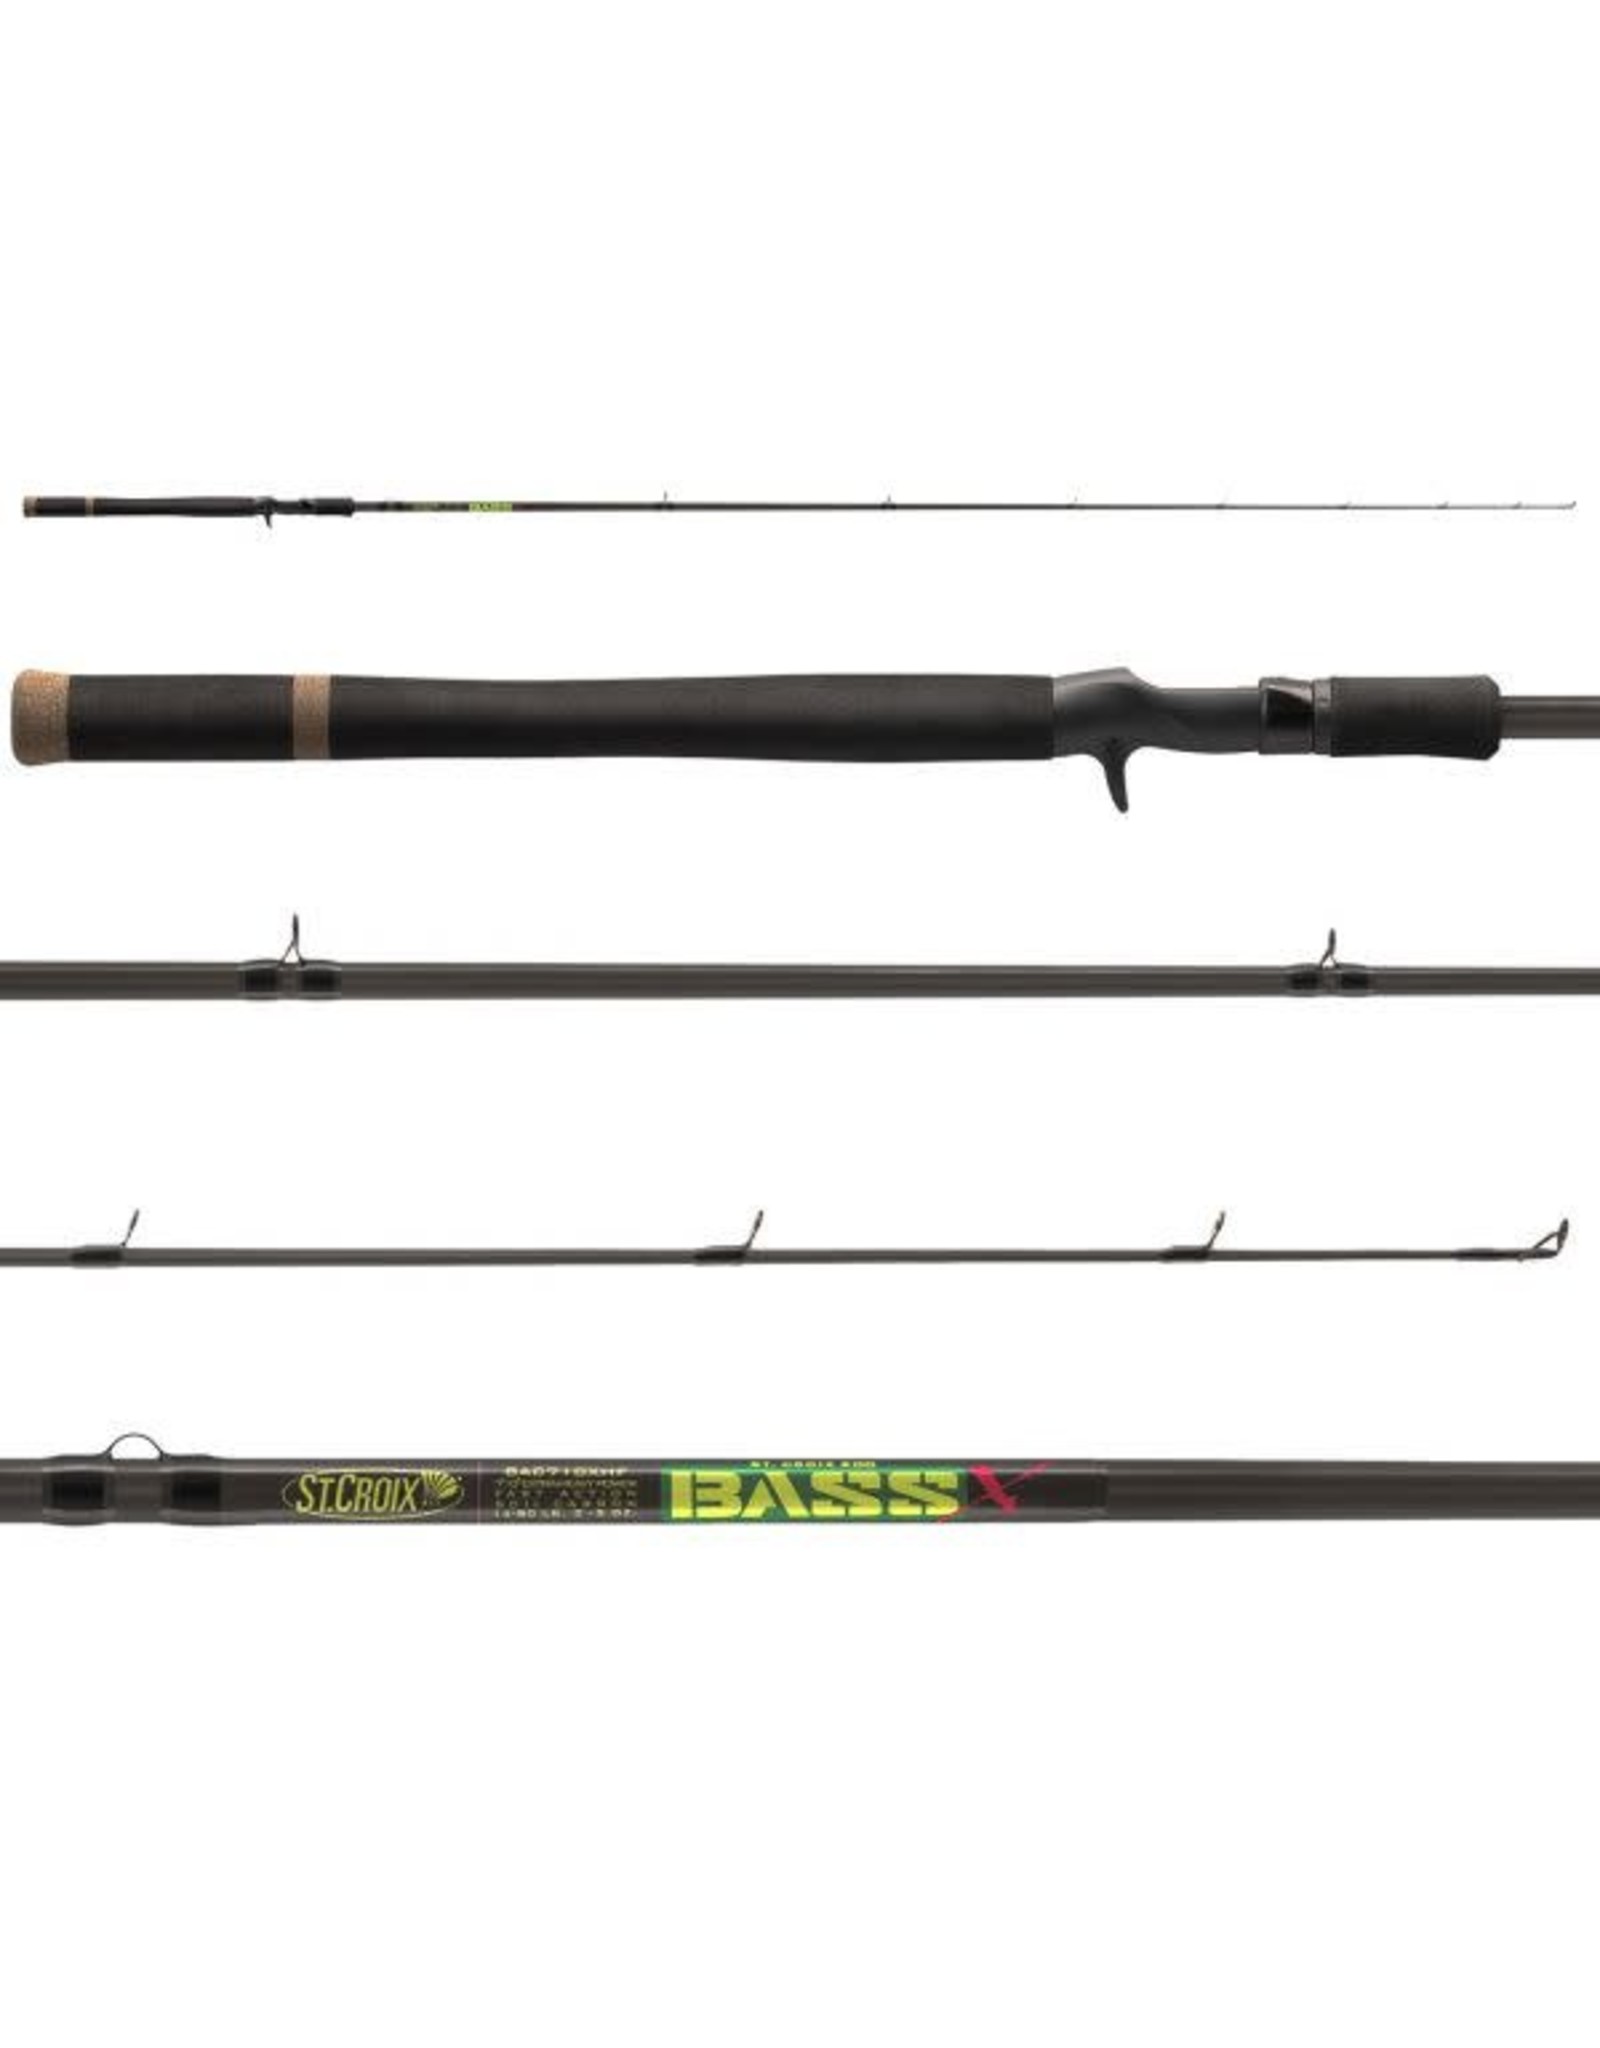 St Croix St. Croix BassX spinning rod 7'1 MF action